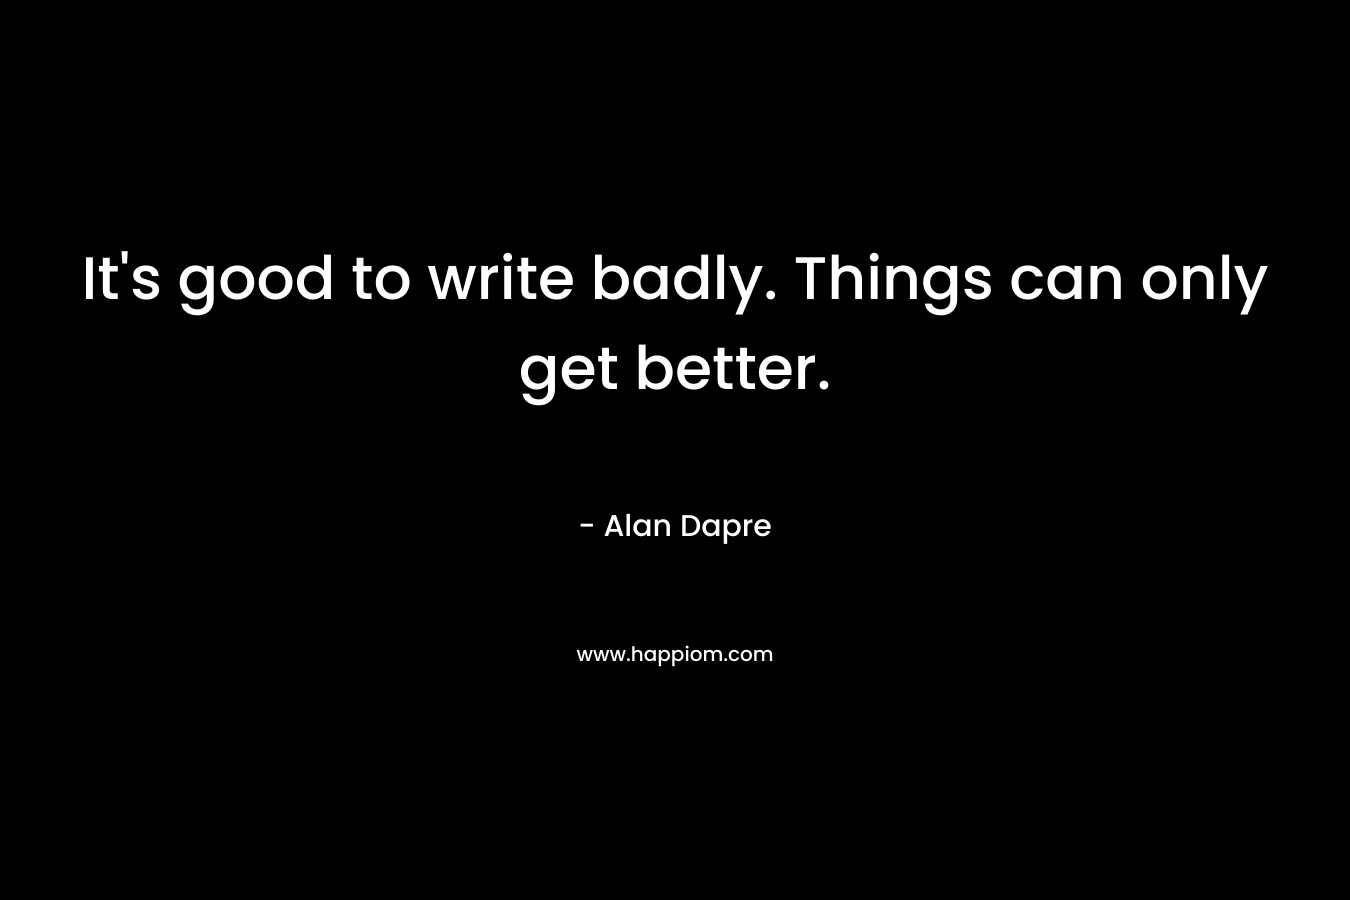 It’s good to write badly. Things can only get better. – Alan Dapre